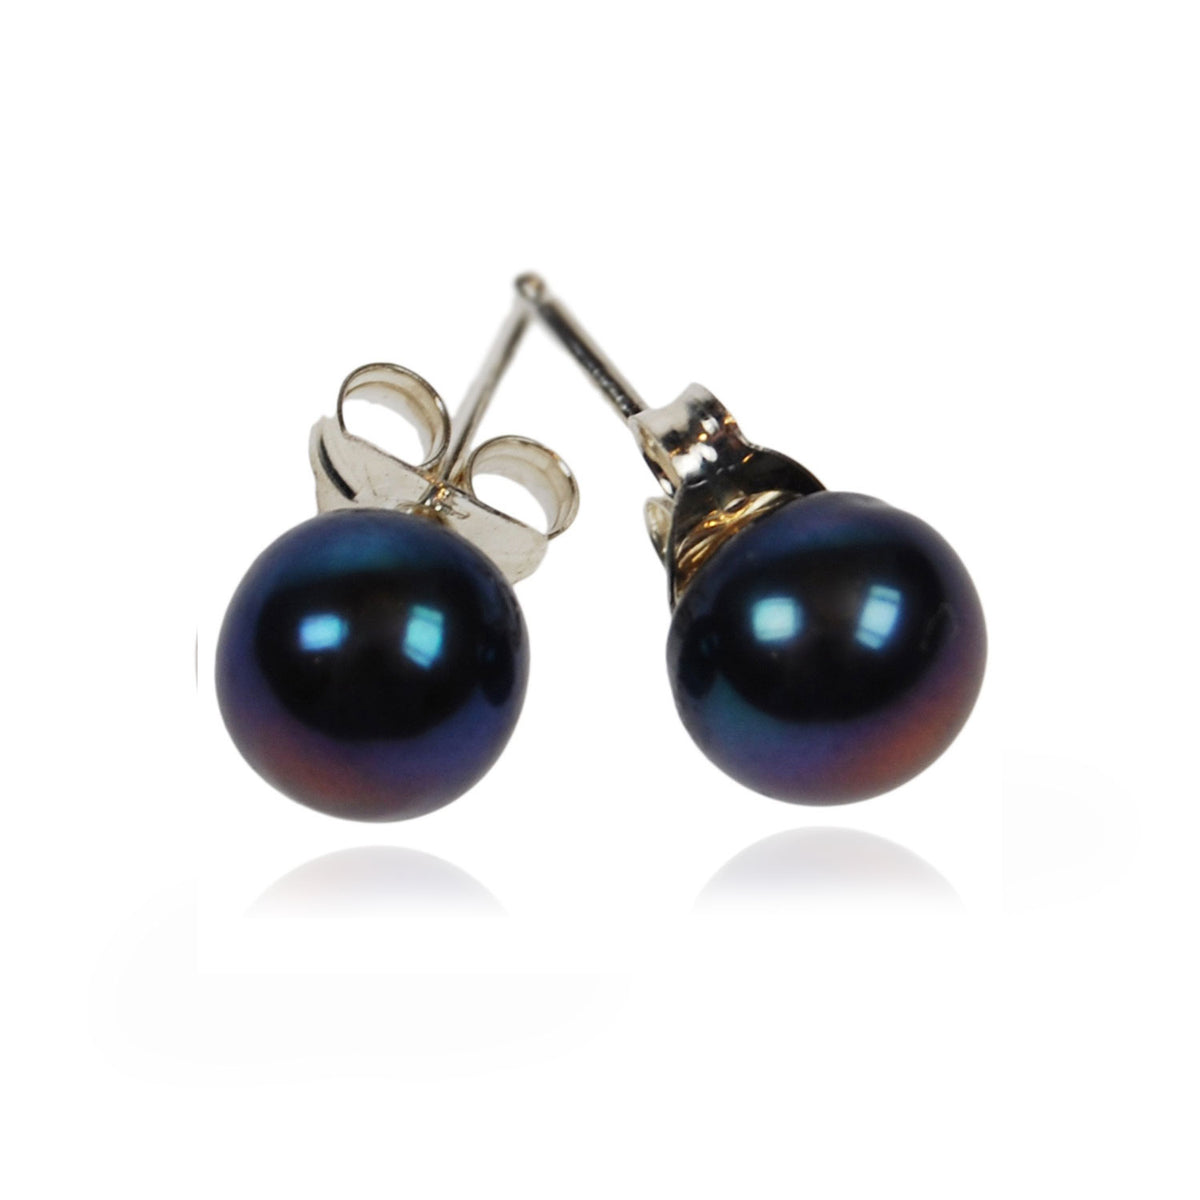 Freshwater Pearl Studs on Silver Posts in Peacock Black